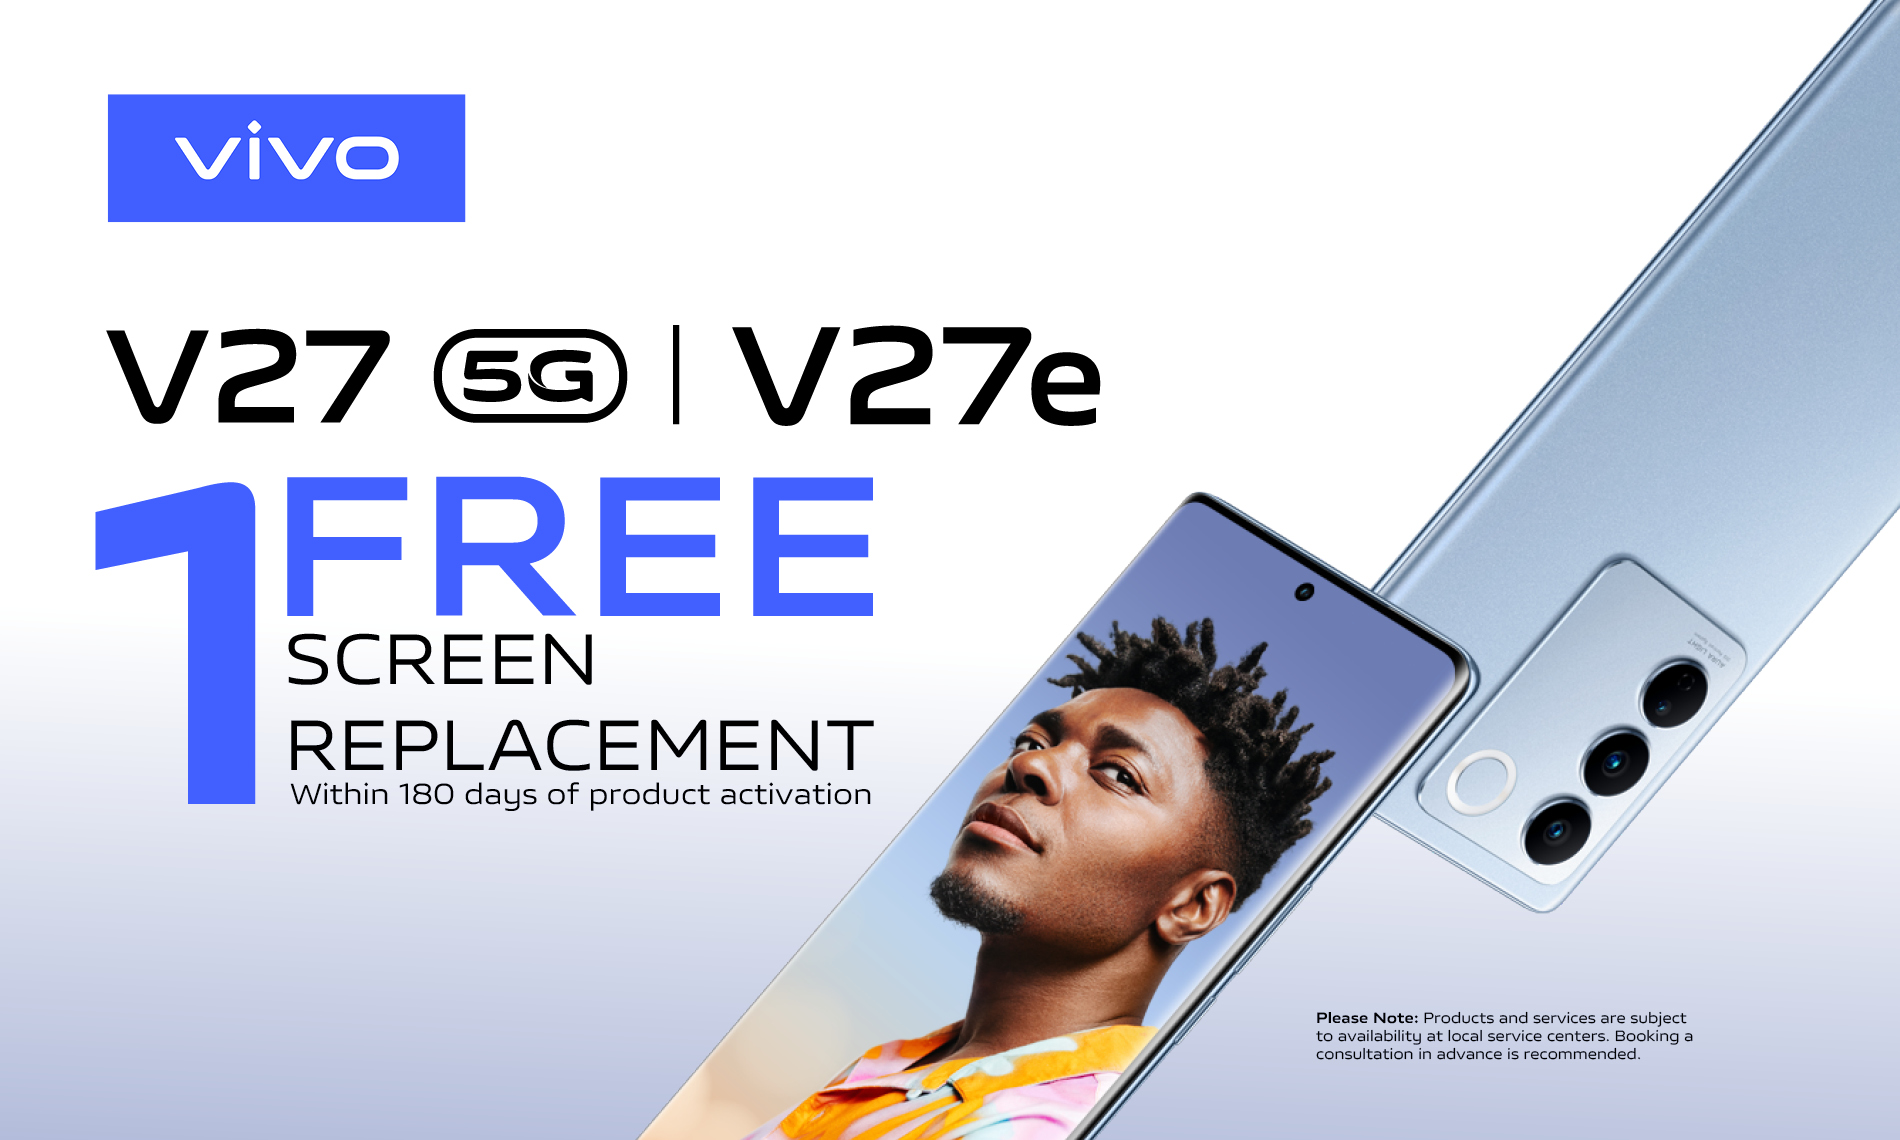 1 Free Screen Replacement for V27 series product